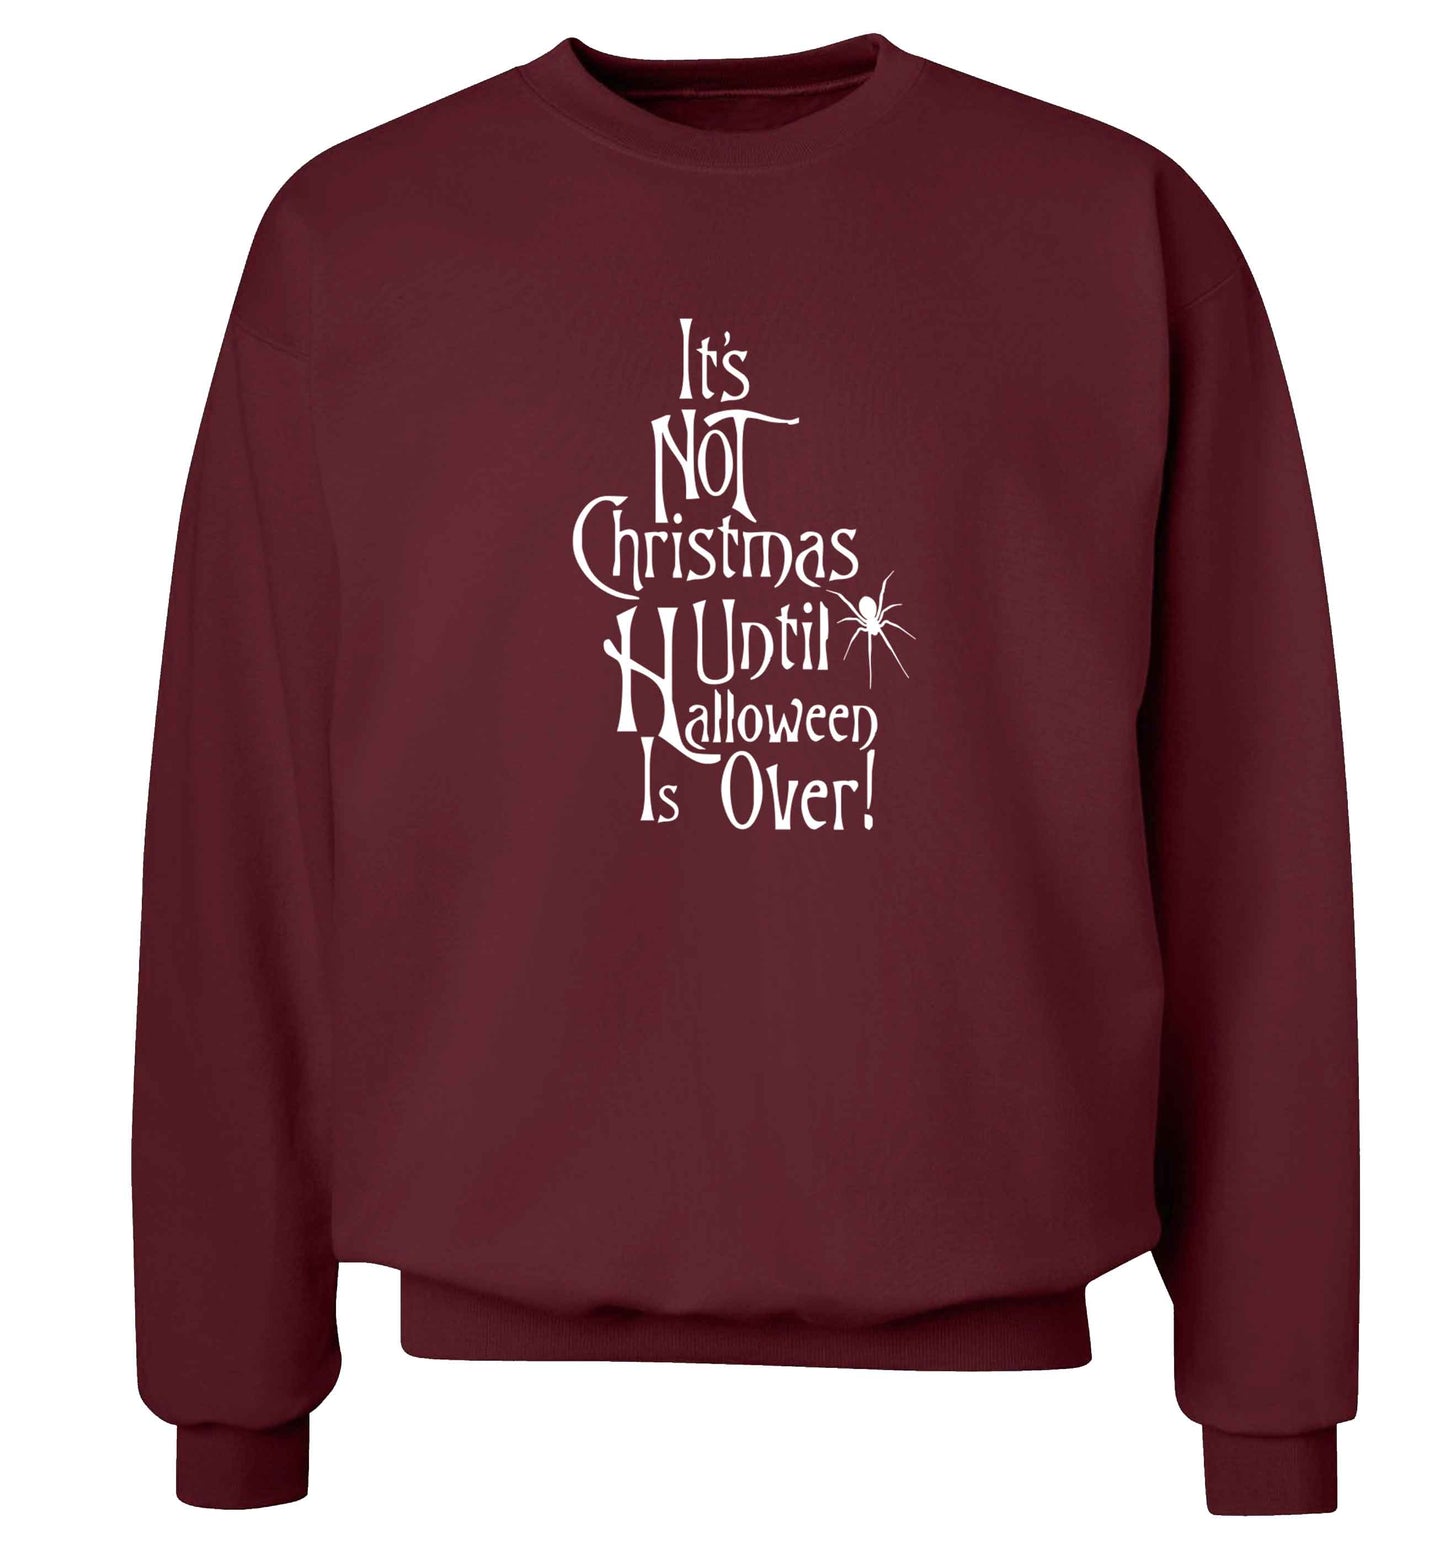 It's not Christmas until Halloween is over adult's unisex maroon sweater 2XL